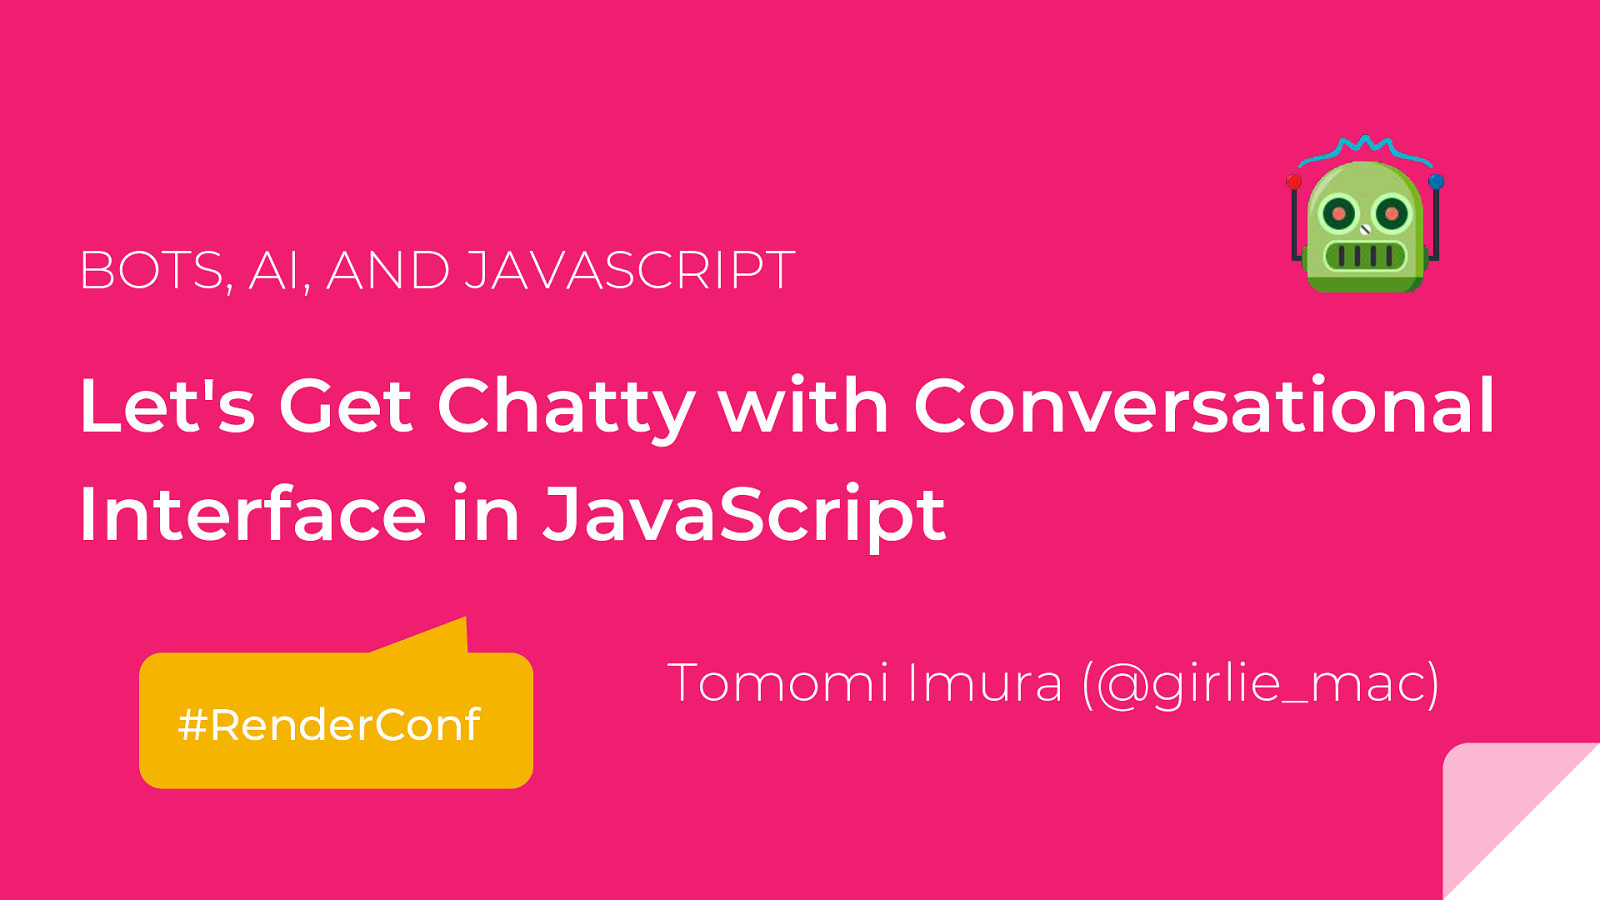 Let’s Get Chatty with Conversational Interface in JavaScript